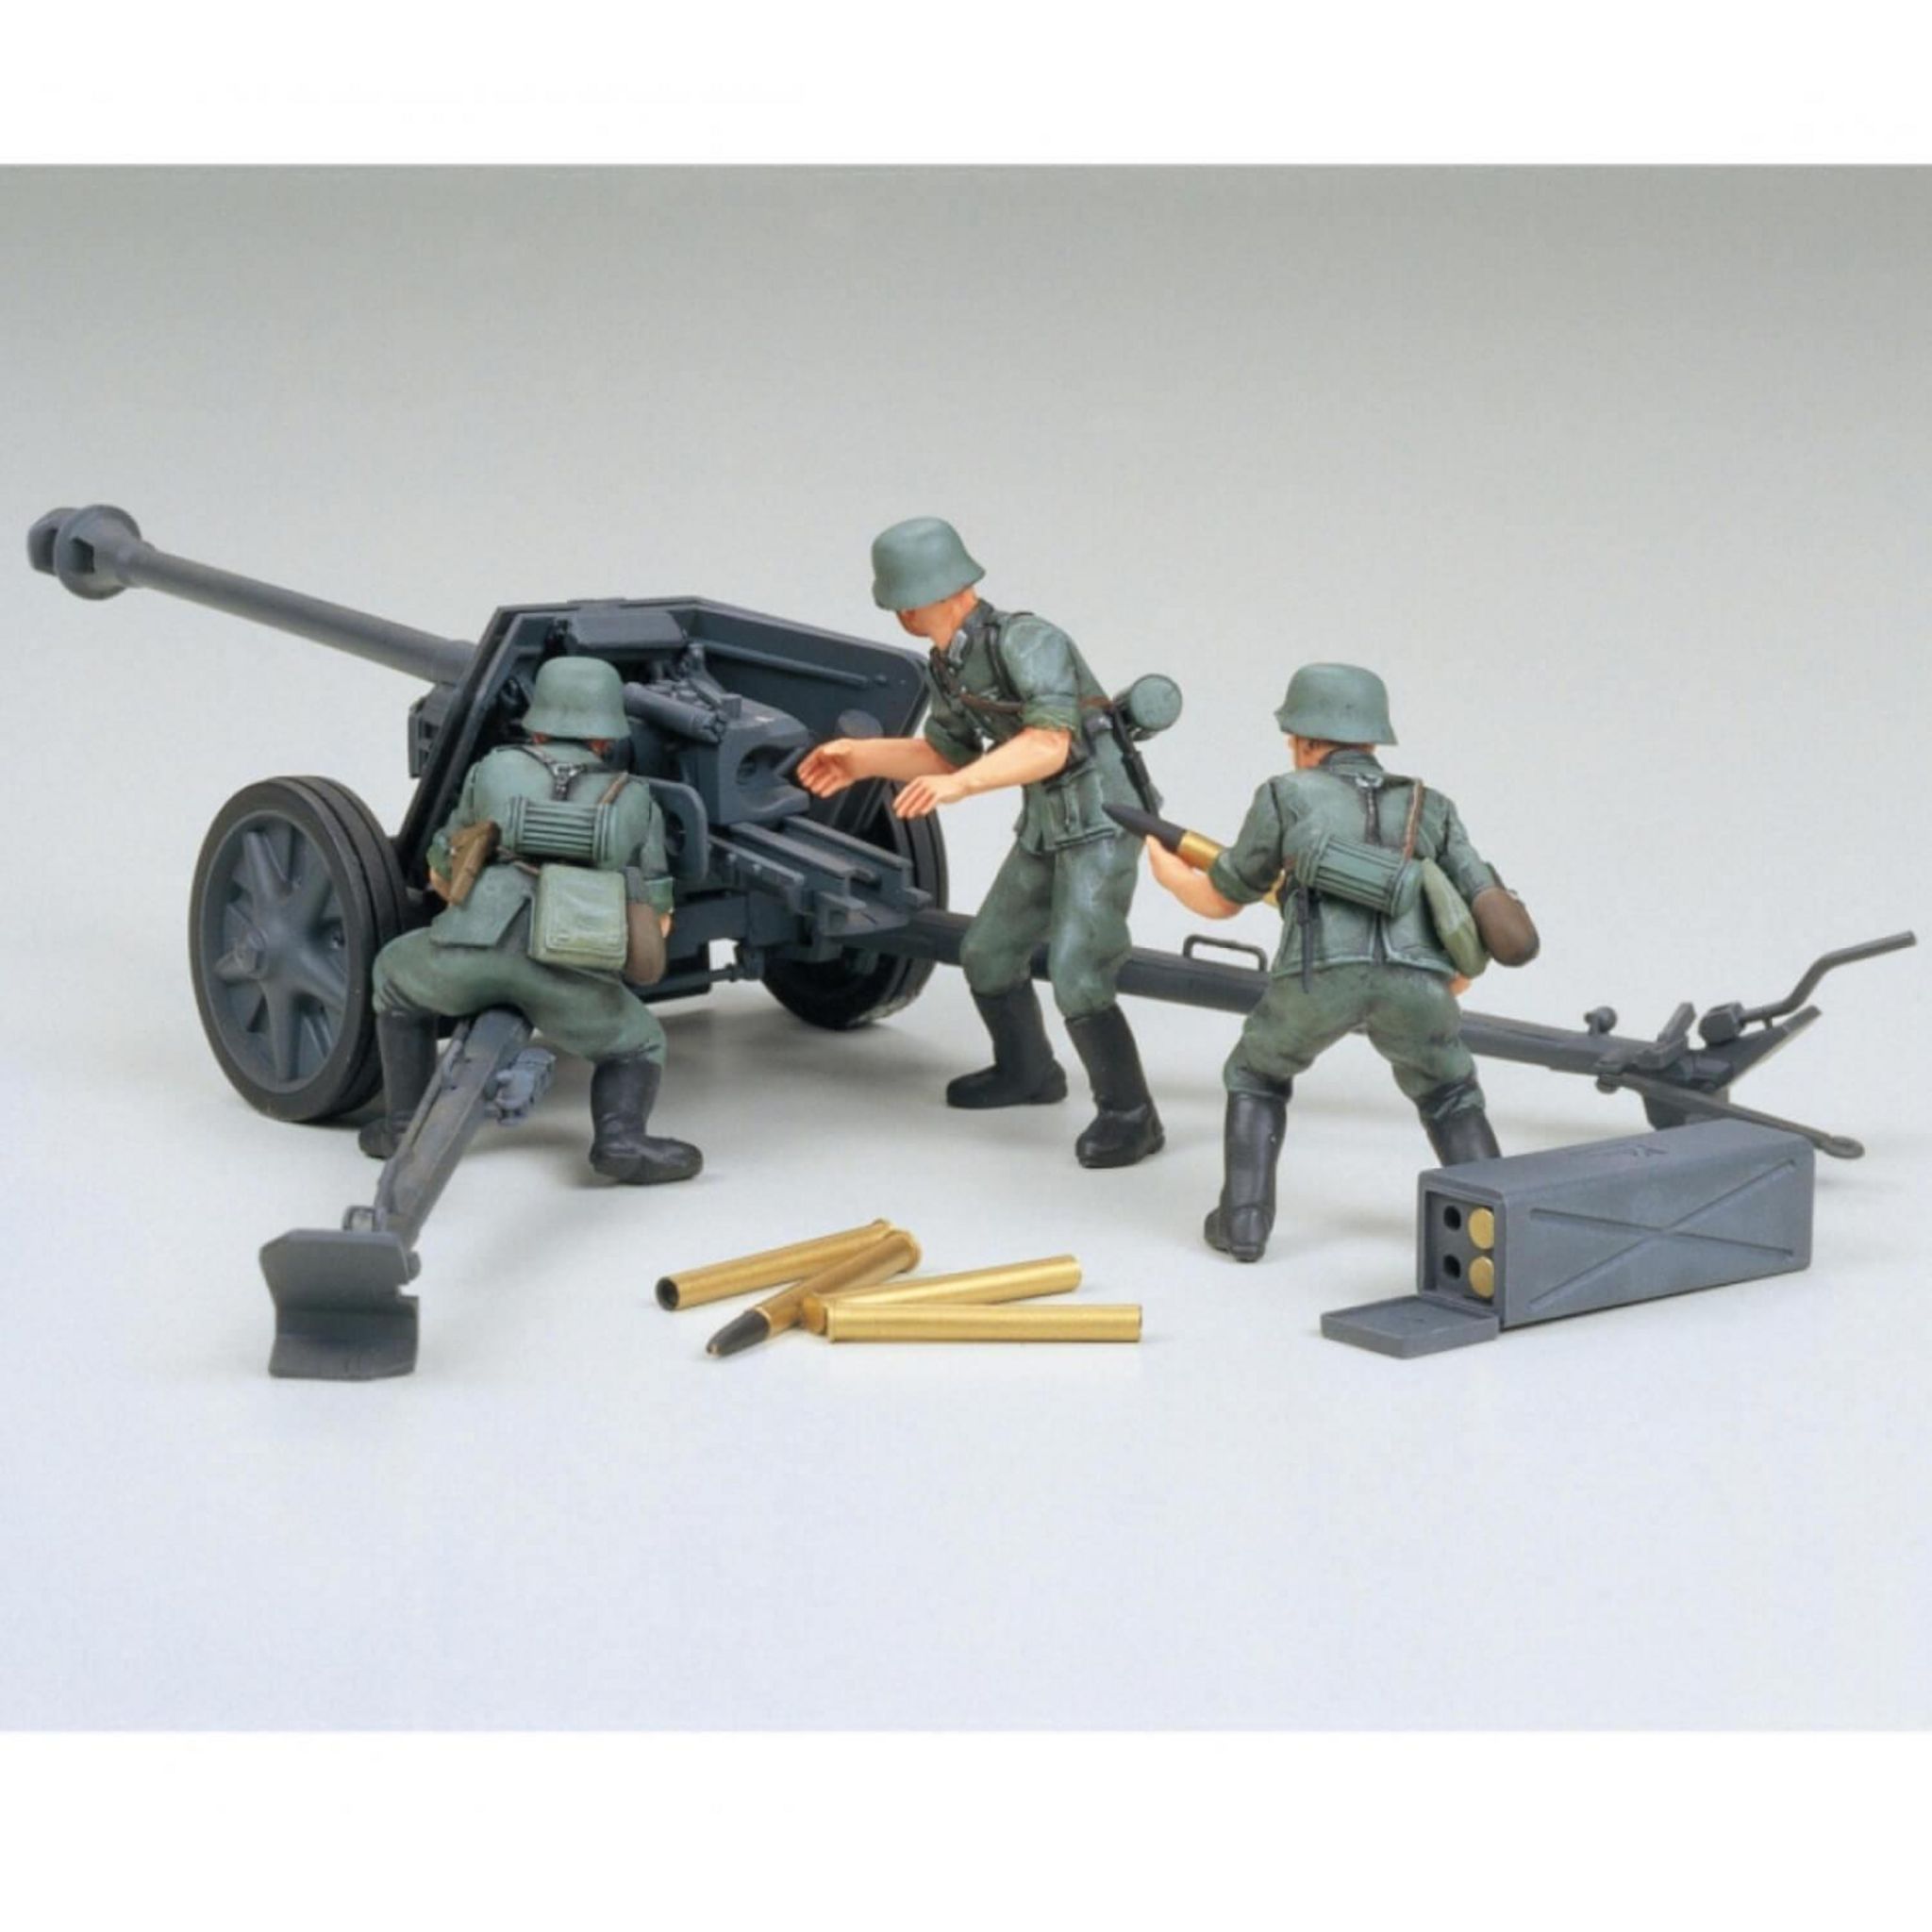 Tamiya Maquette et figurines militaires : Canon anti-char 75mm pas cher 